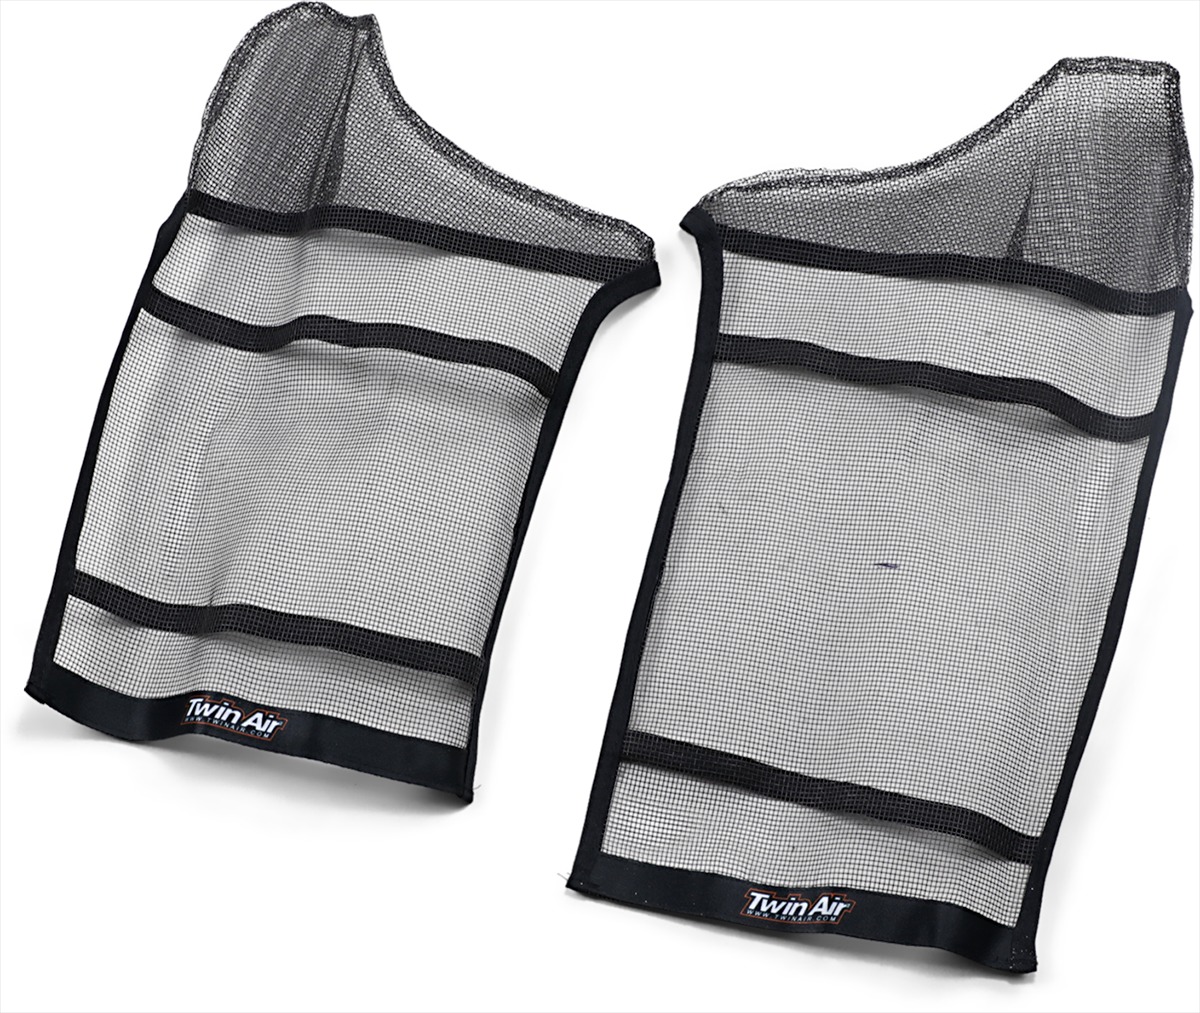 Radiator Sleeve Set - For 19-20 CRF450R/RX - Click Image to Close